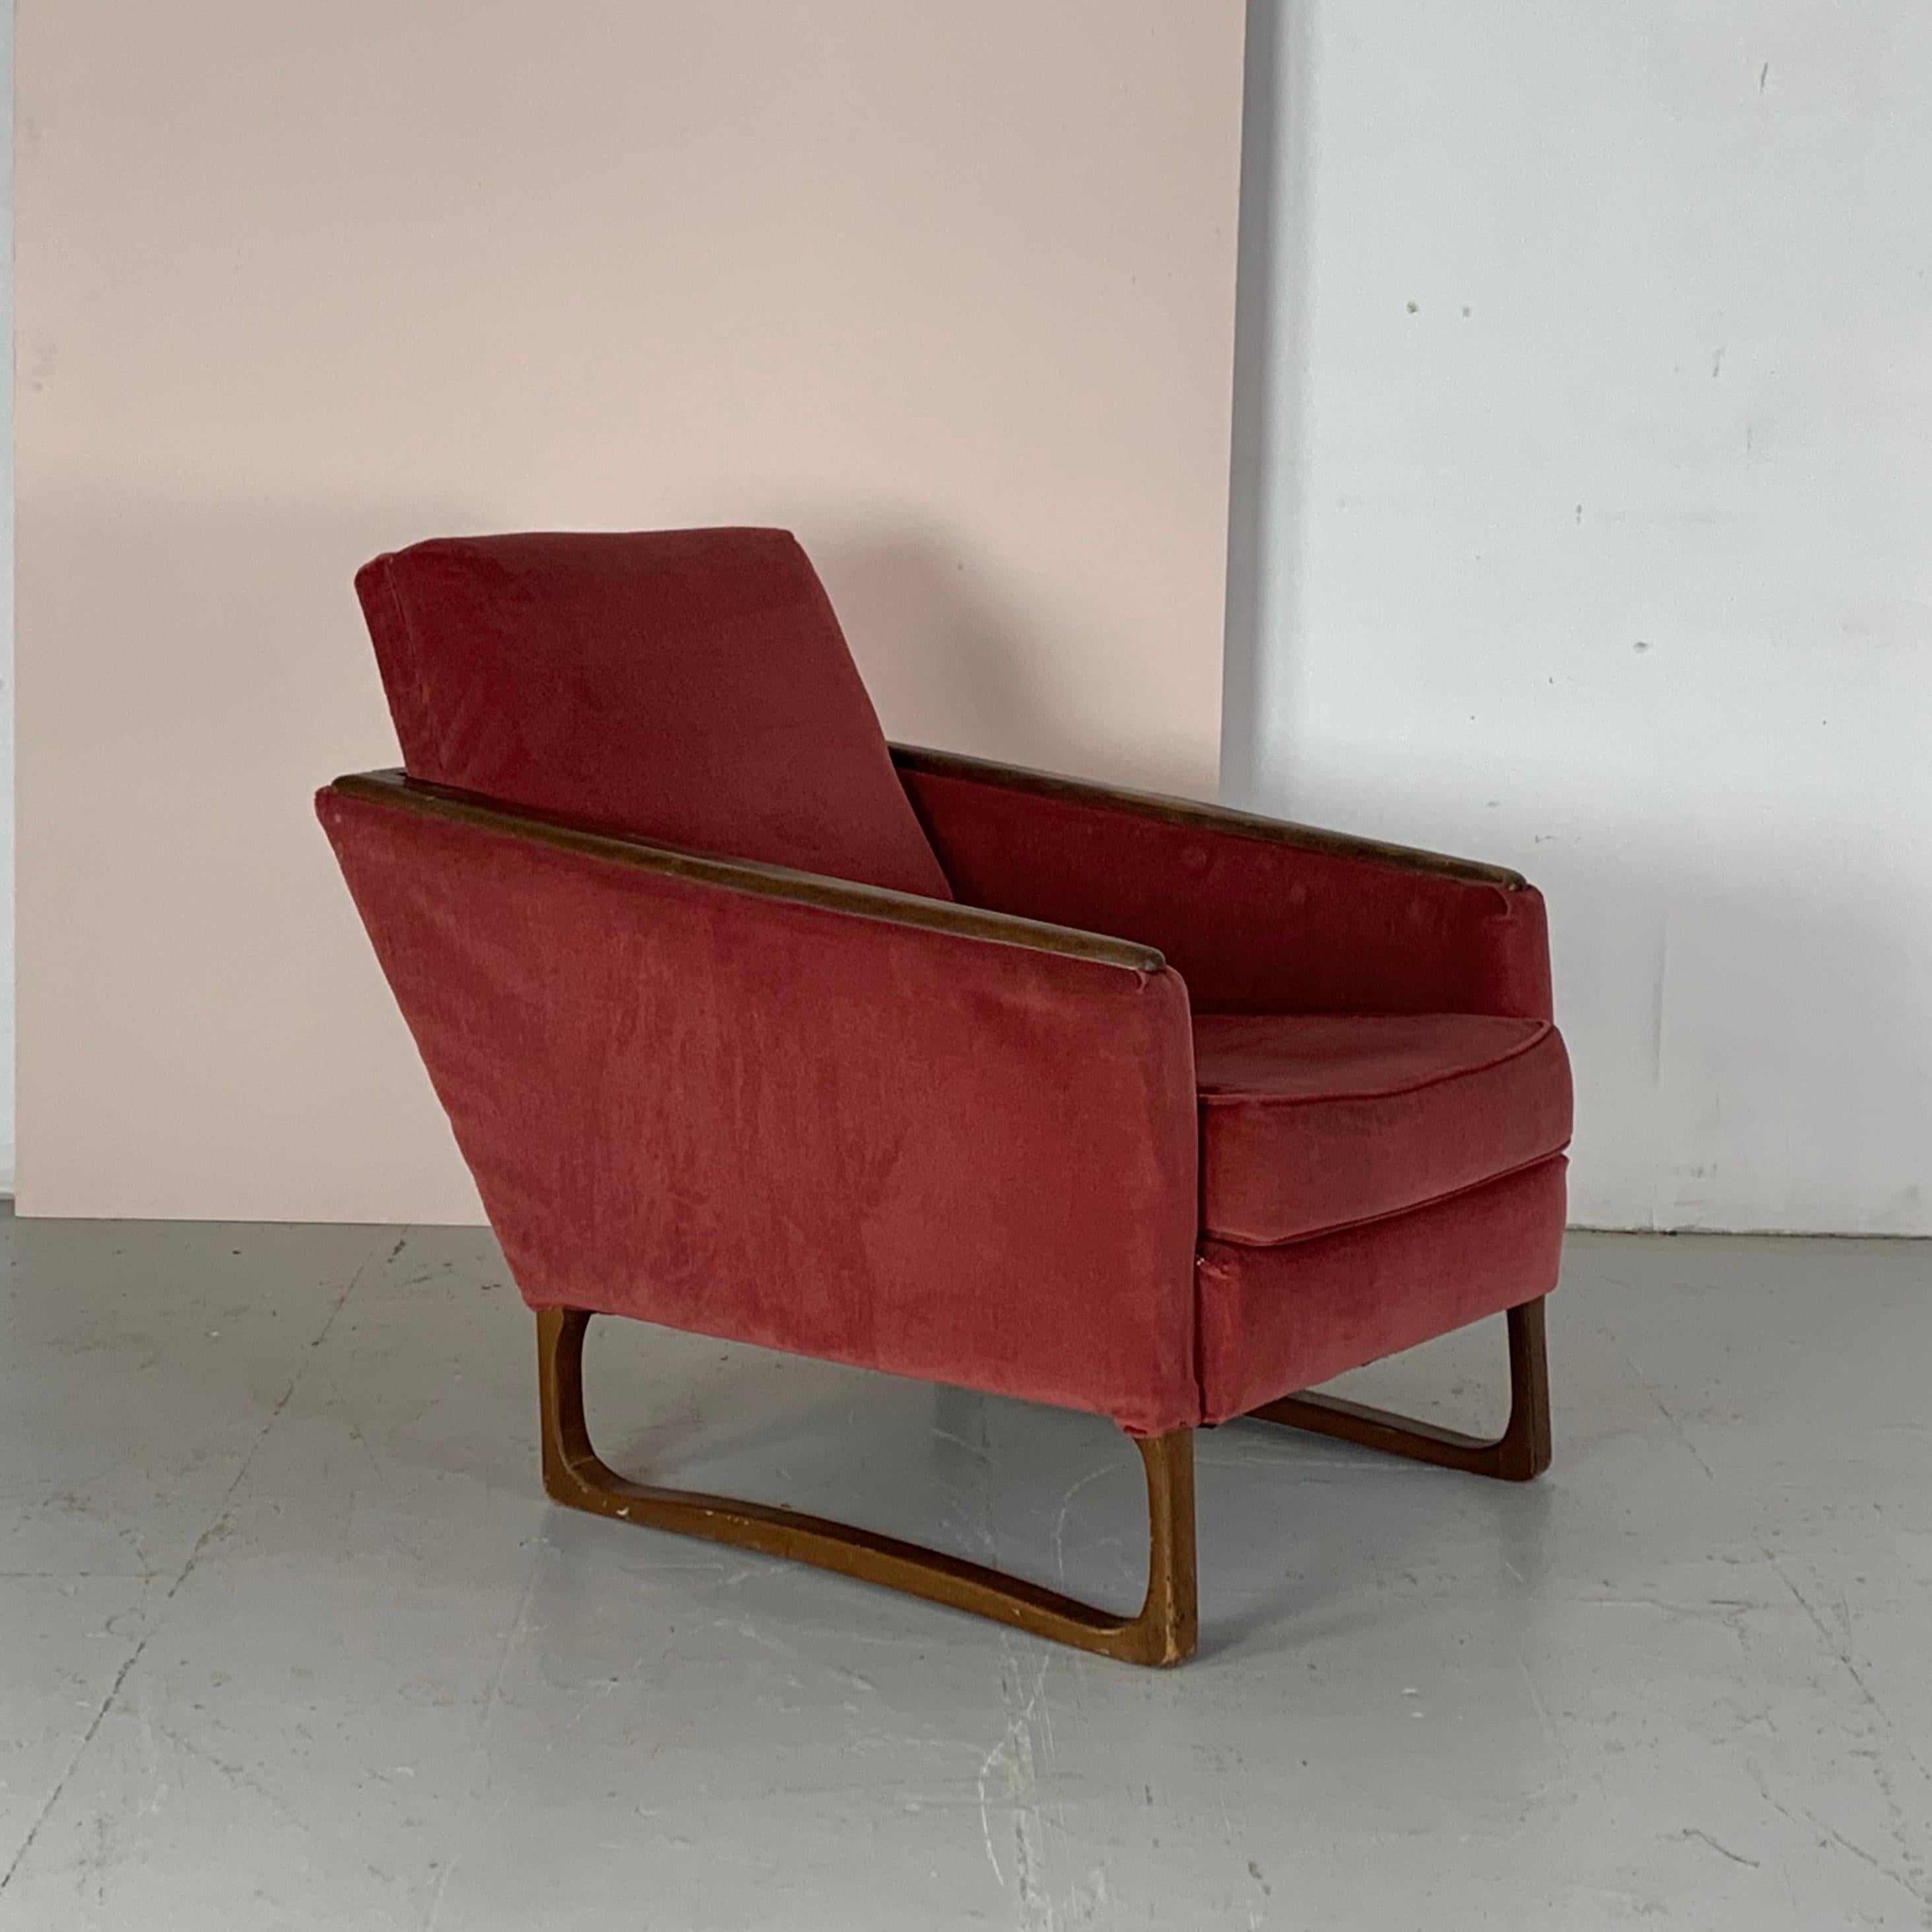 In good vintage condition. Some wear, to be expected with age - some small scuffs and marks particularly on the wooden base, but nothing significant or noticeable. The cushions and upholstery are in good condition.

Approximate